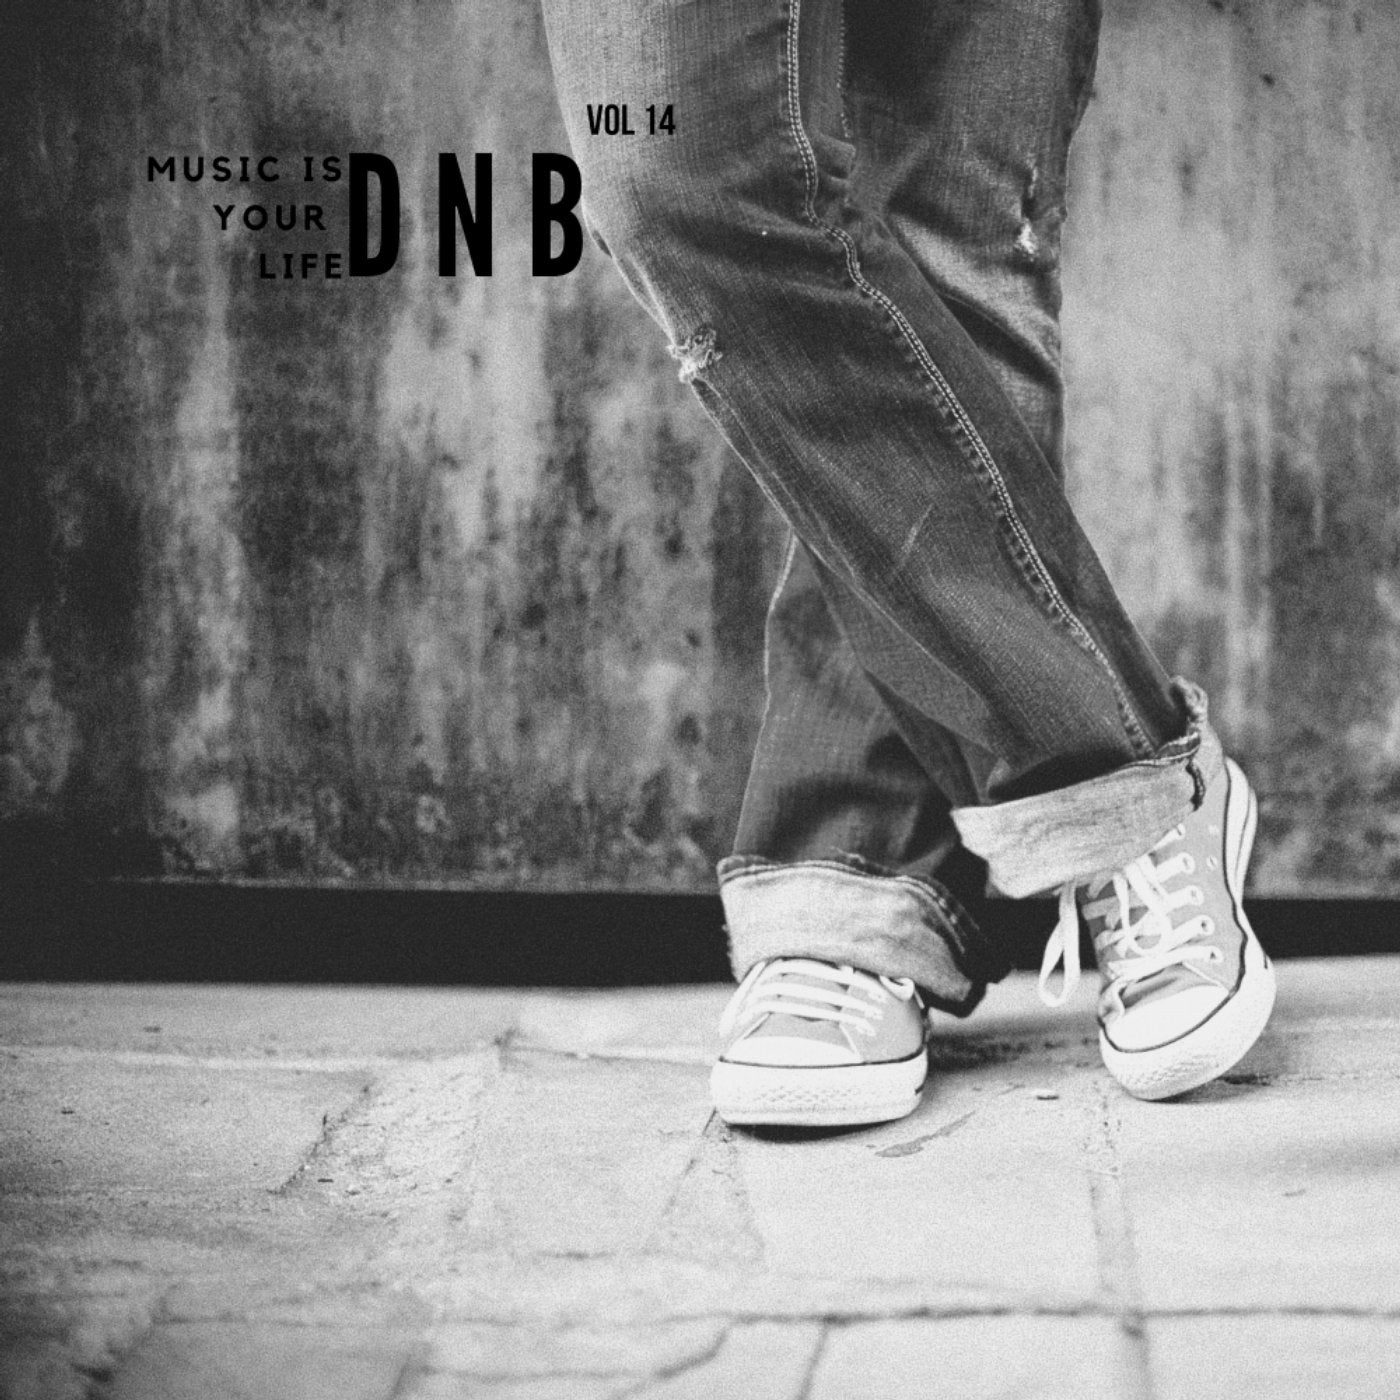 Music Is Your Life Dnb, Vol. 14